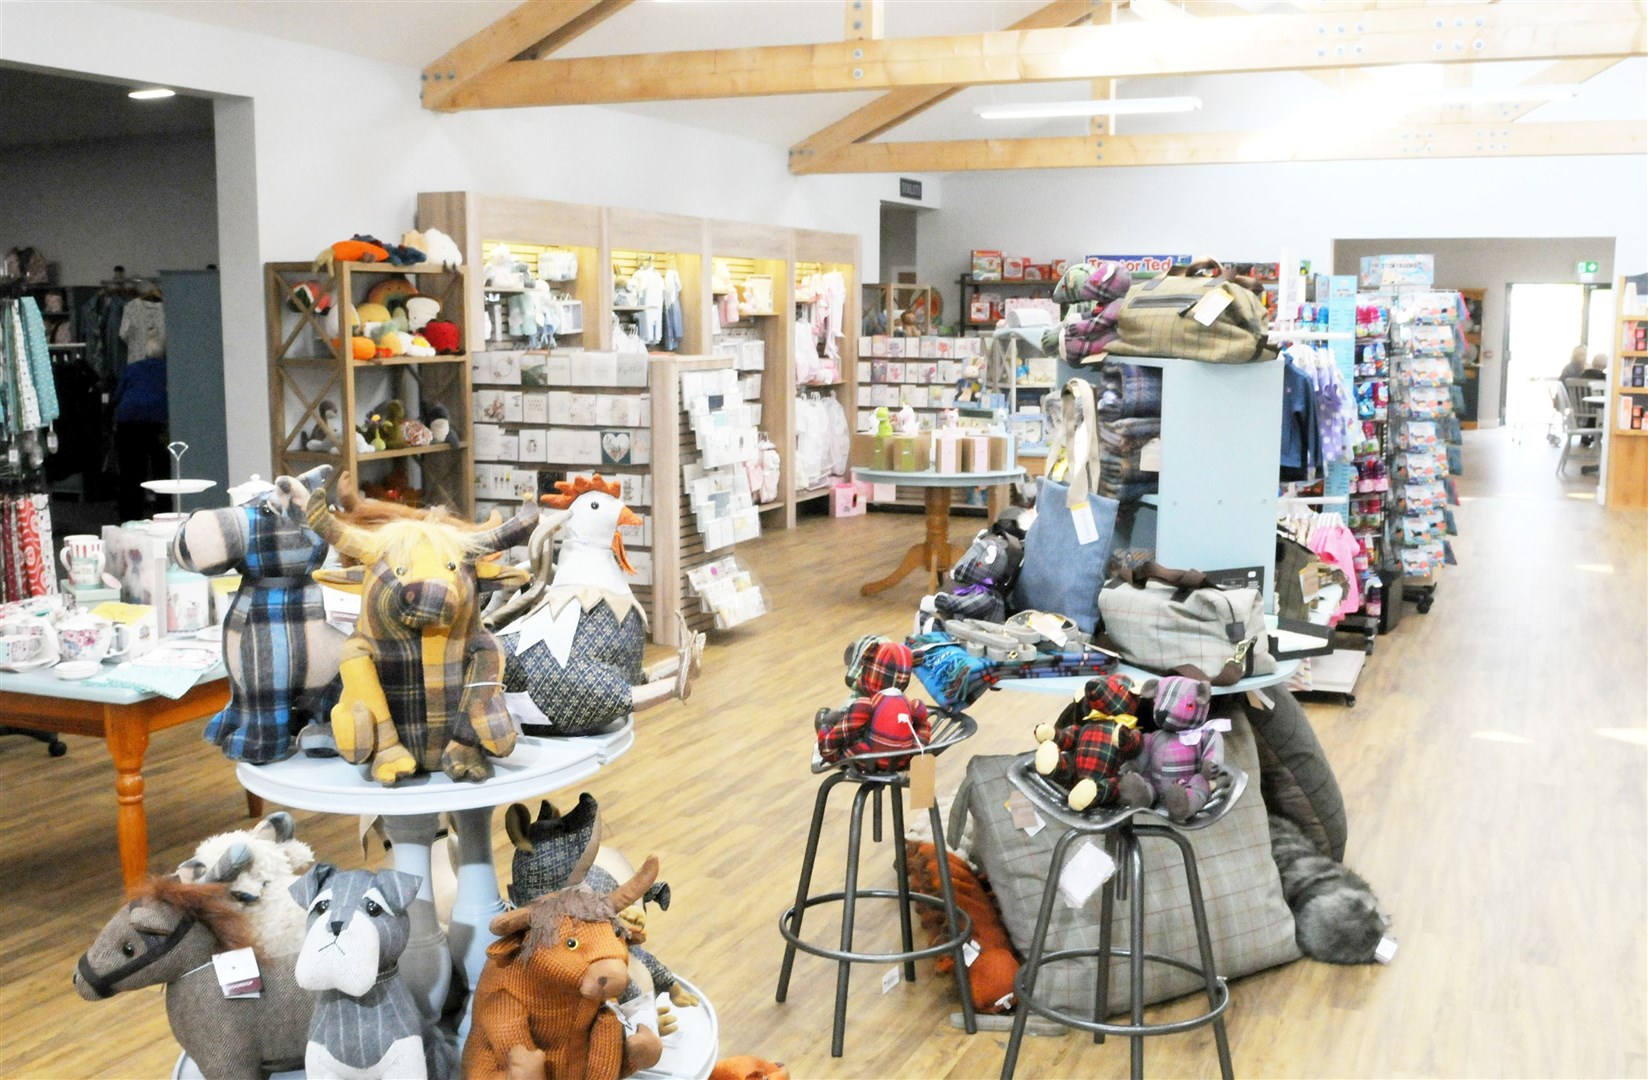 Dalmore Farm opened its doors on the 26th of July 2021: Shop interior.Picture: James Mackenzie.